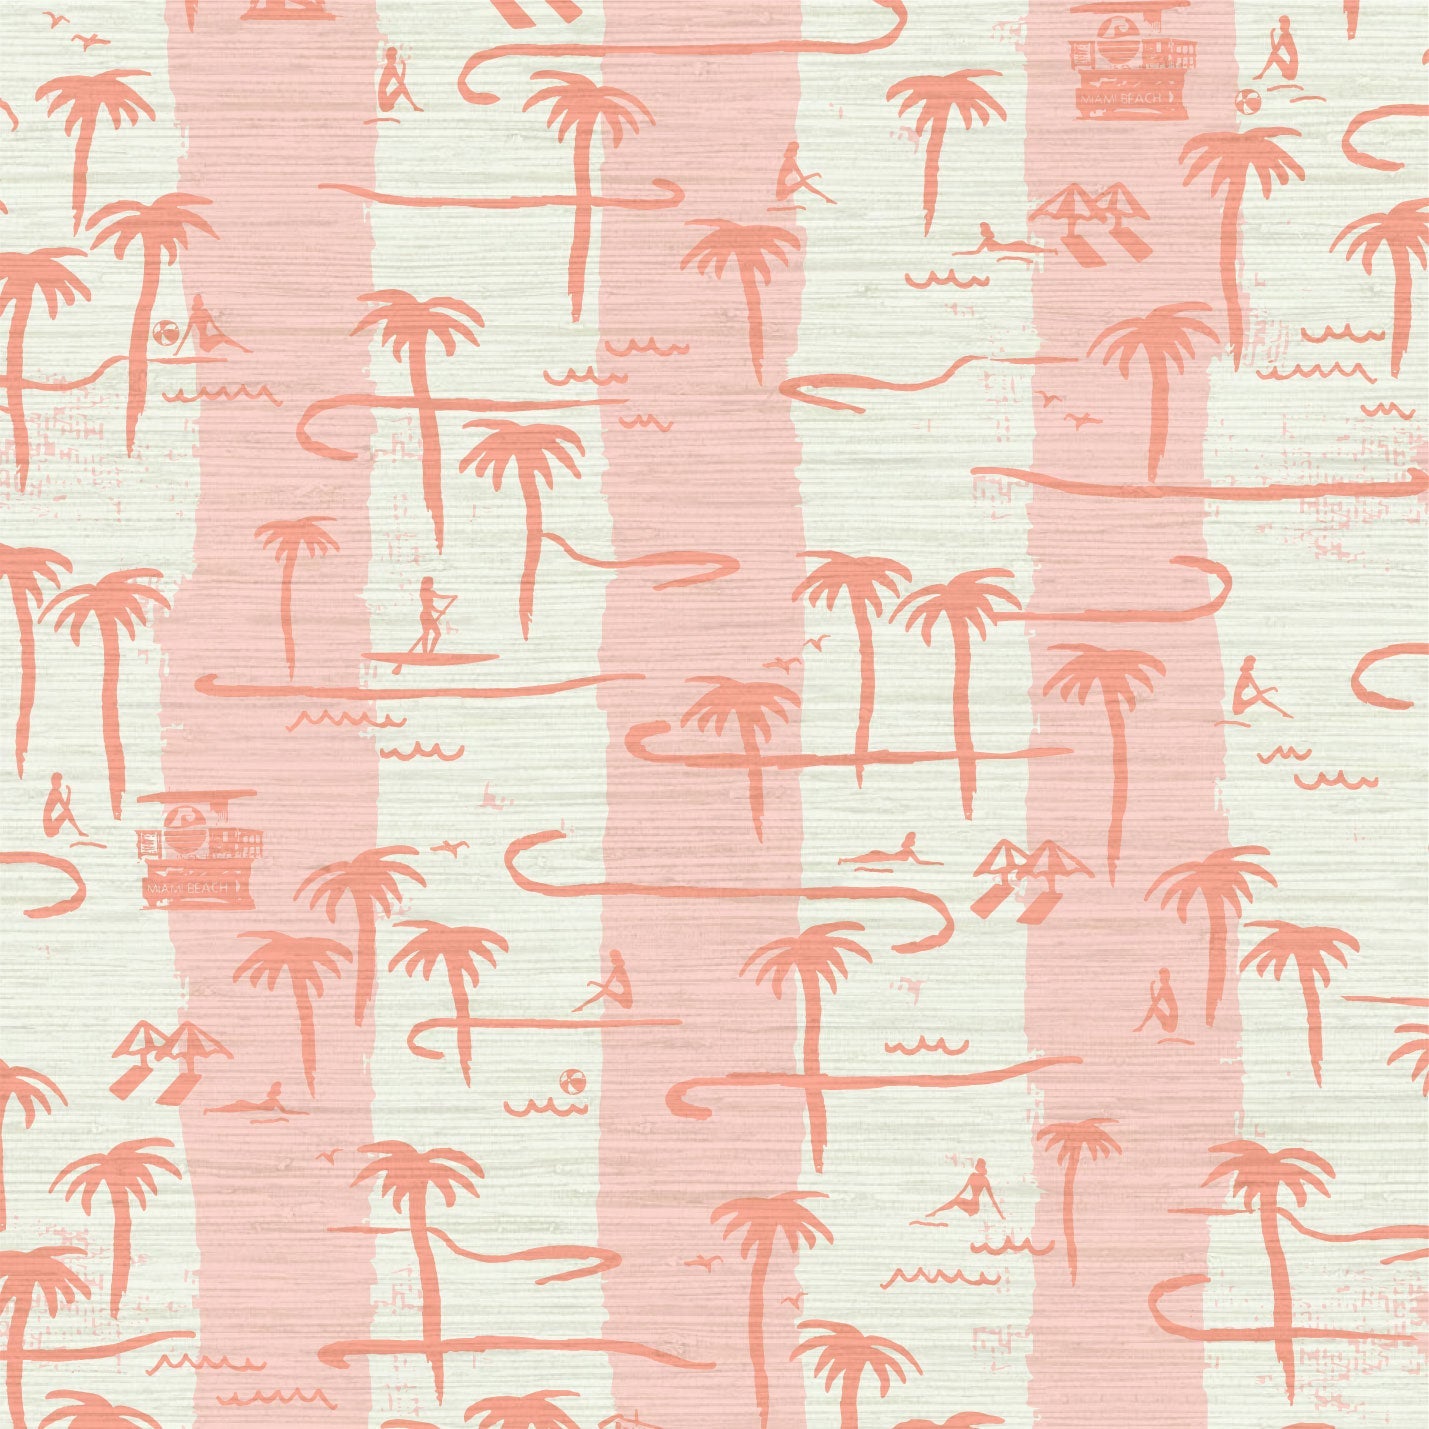 two color vertical stripe beach print featuring palm trees, beachgoers, lifeguard stands and ocean waves Grasscloth Natural Textured Eco-Friendly Non-toxic High-quality Sustainable practices Sustainability Interior Design Wall covering Bold Wallpaper Custom Tailor-made Retro chic Tropical Seaside Coastal Seashore Waterfront Vacation home styling Retreat Relaxed beach vibes Beach cottage Shoreline Oceanfront Nautical white pink baby light coral dark pink red